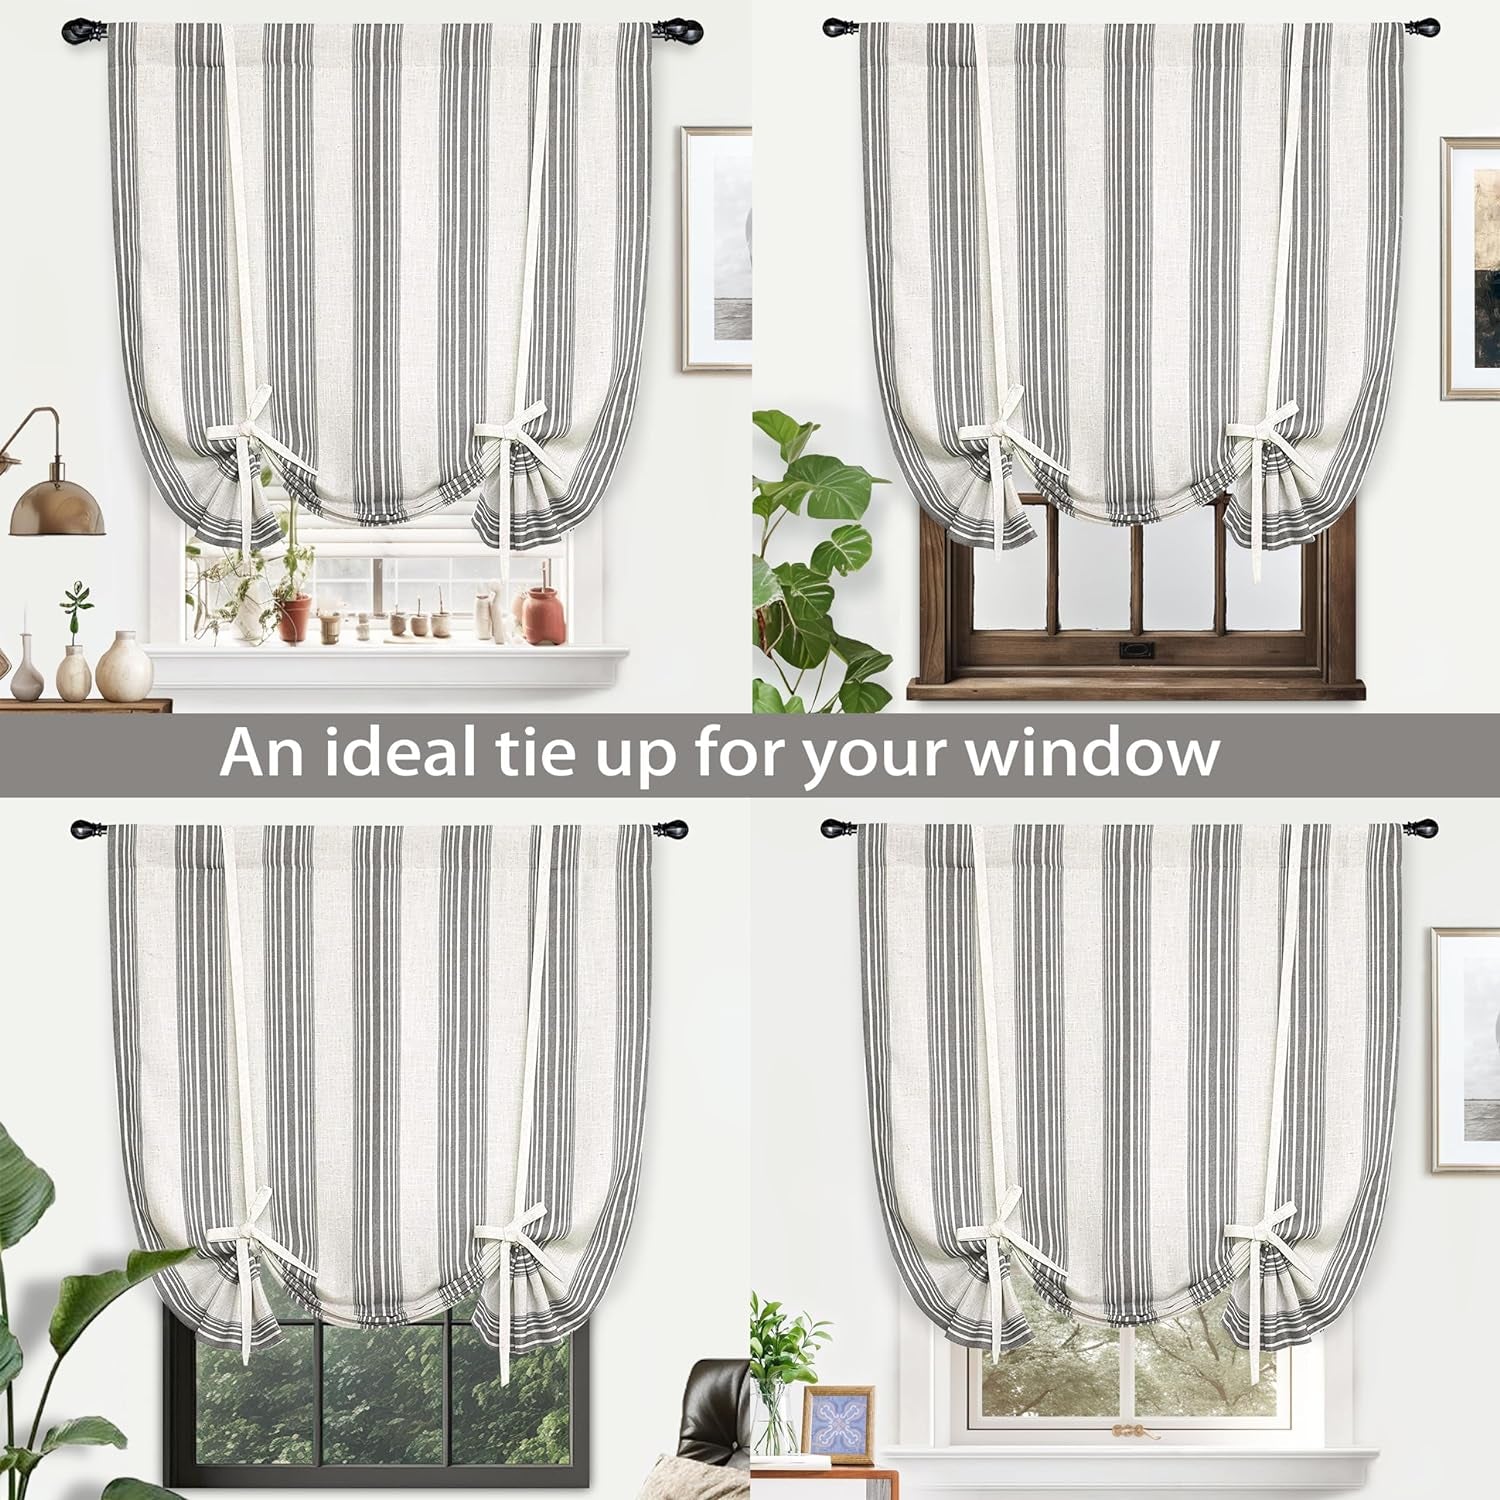 Driftaway Chris Vertical Striped Pattern Blackout Room Darkening Thermal Insulated Tie up Adjustable Balloon Rod Pocket Curtain for Small Window 45 Inch by 63 Inch Gray